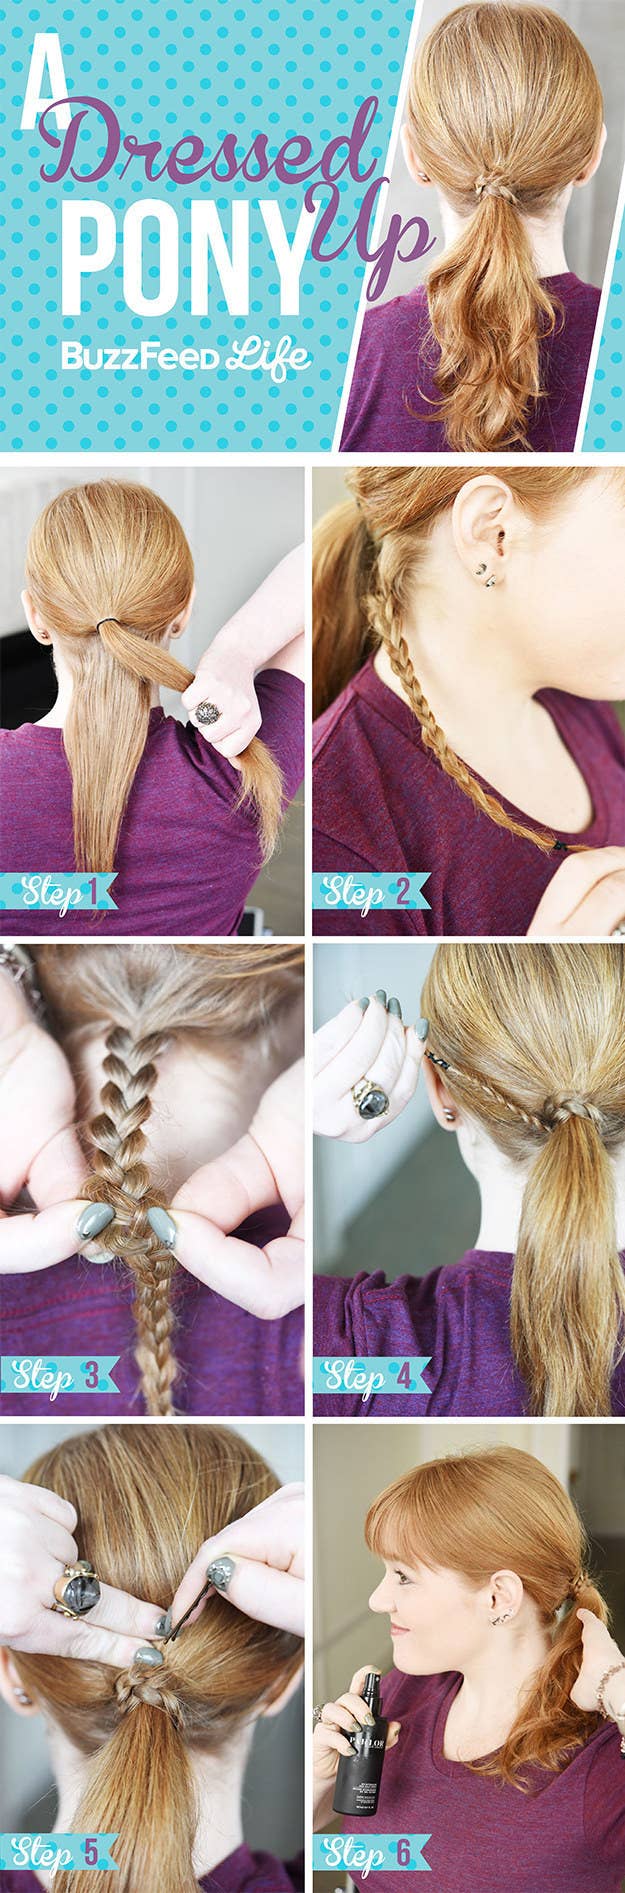 Easy way to elevate straight hair ✨ #minibraids